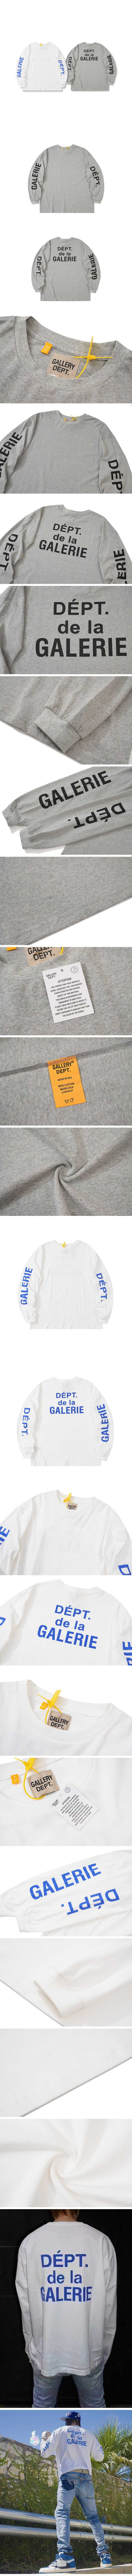 Gallery Dept. French Collector Logo L/S Tee ギャラリーデプト フレンチ コレクター ロゴ ロンT